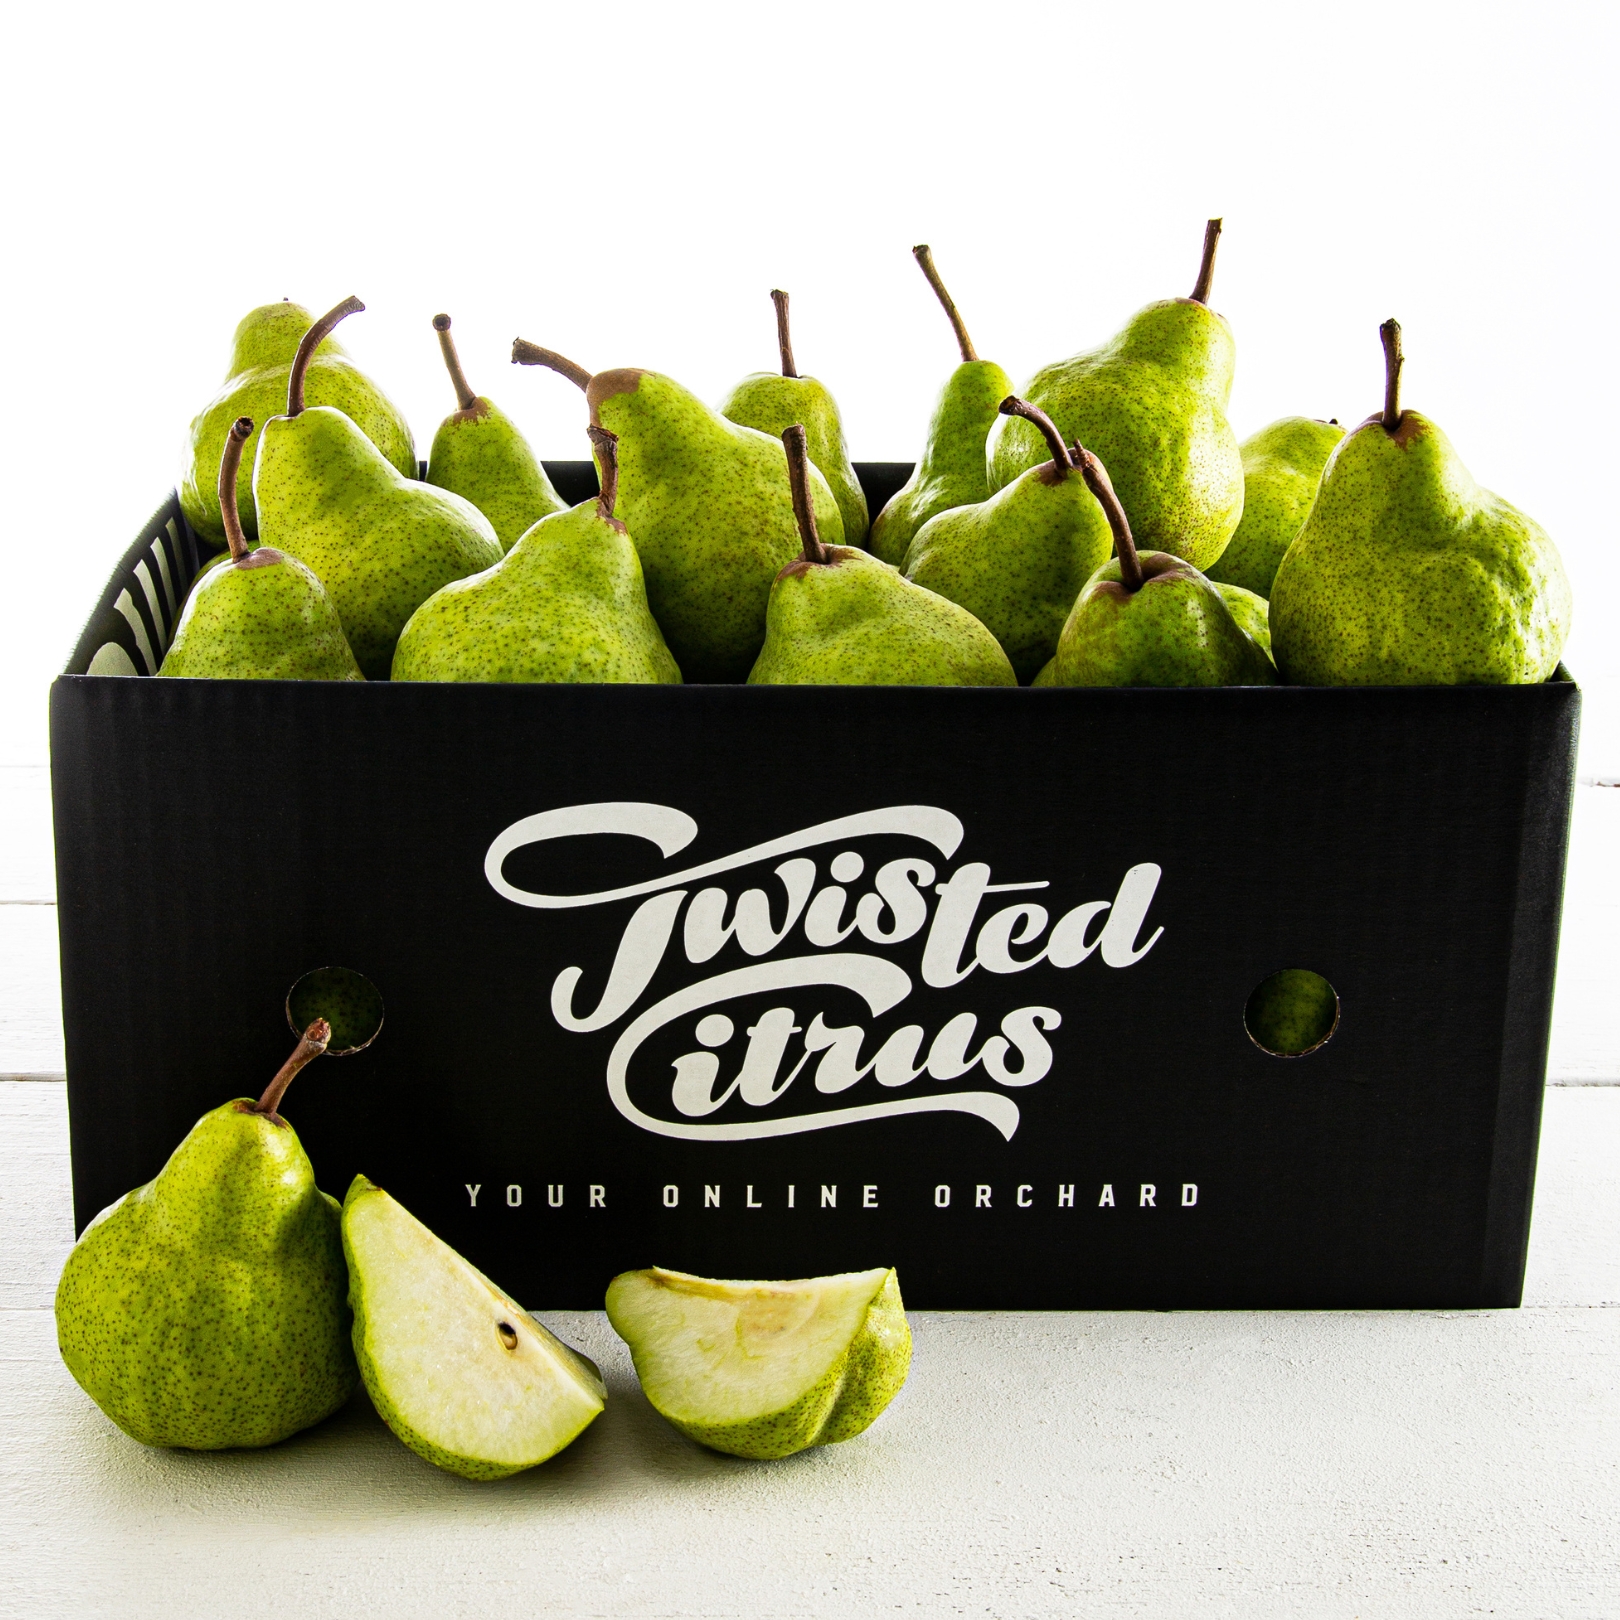 Pears - Packham fruit box delivery nz